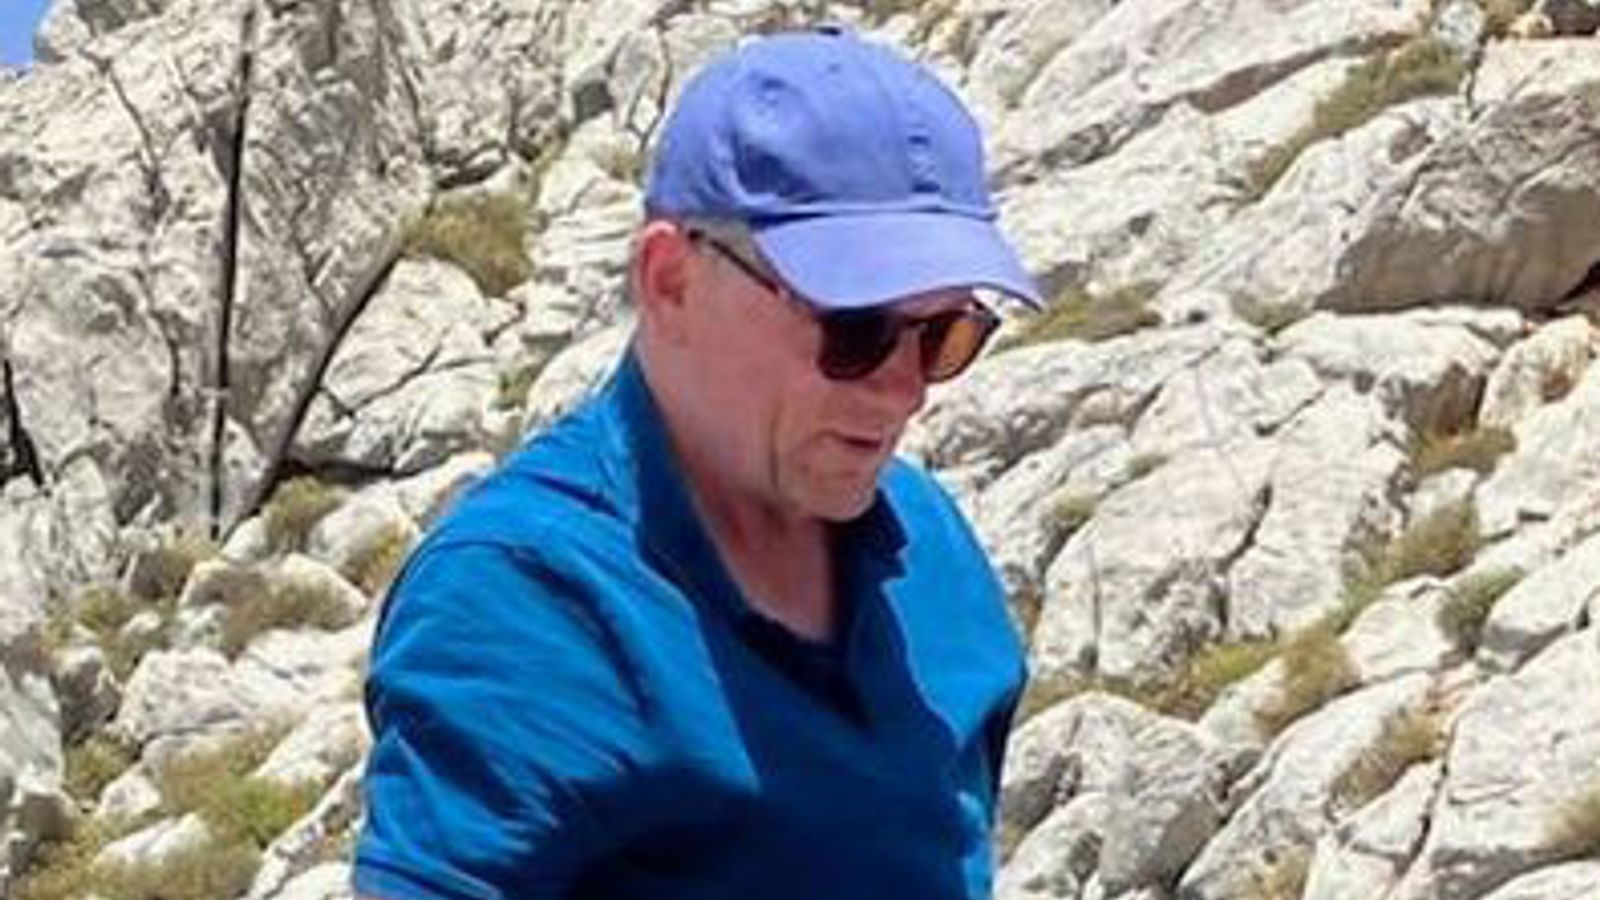 After a painstaking four-day search, TV doctor's body was found just metres from safety